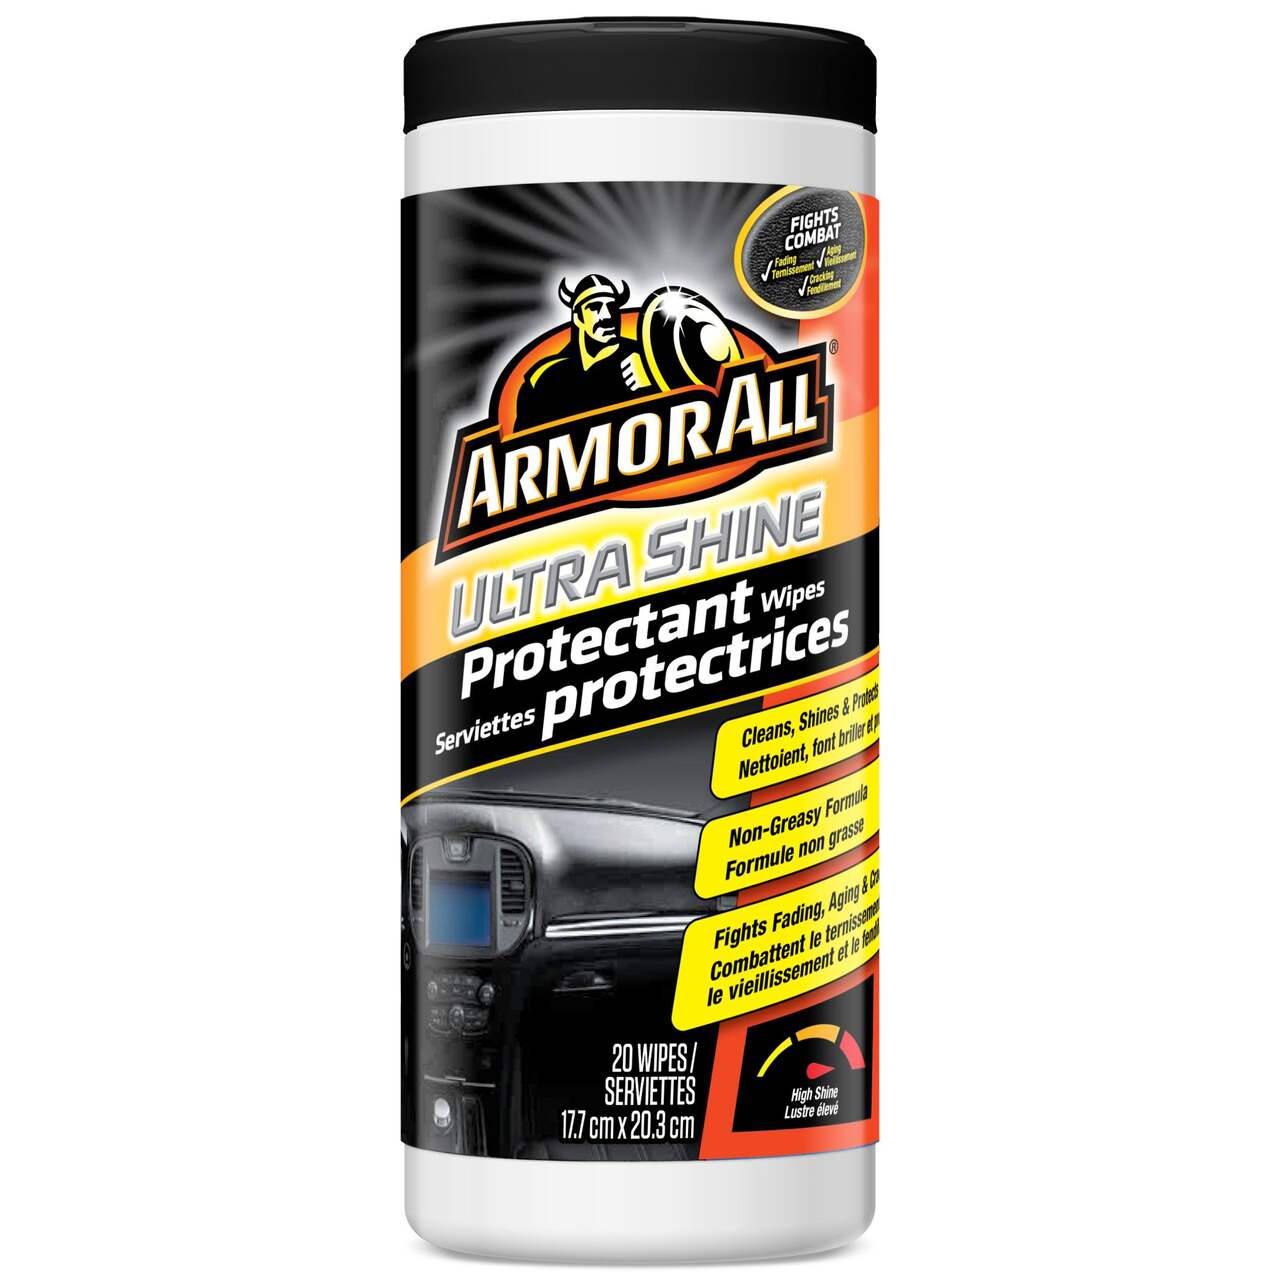 Lingettes protectrices pour voiture Armor All Ultra Shine, paq. 20